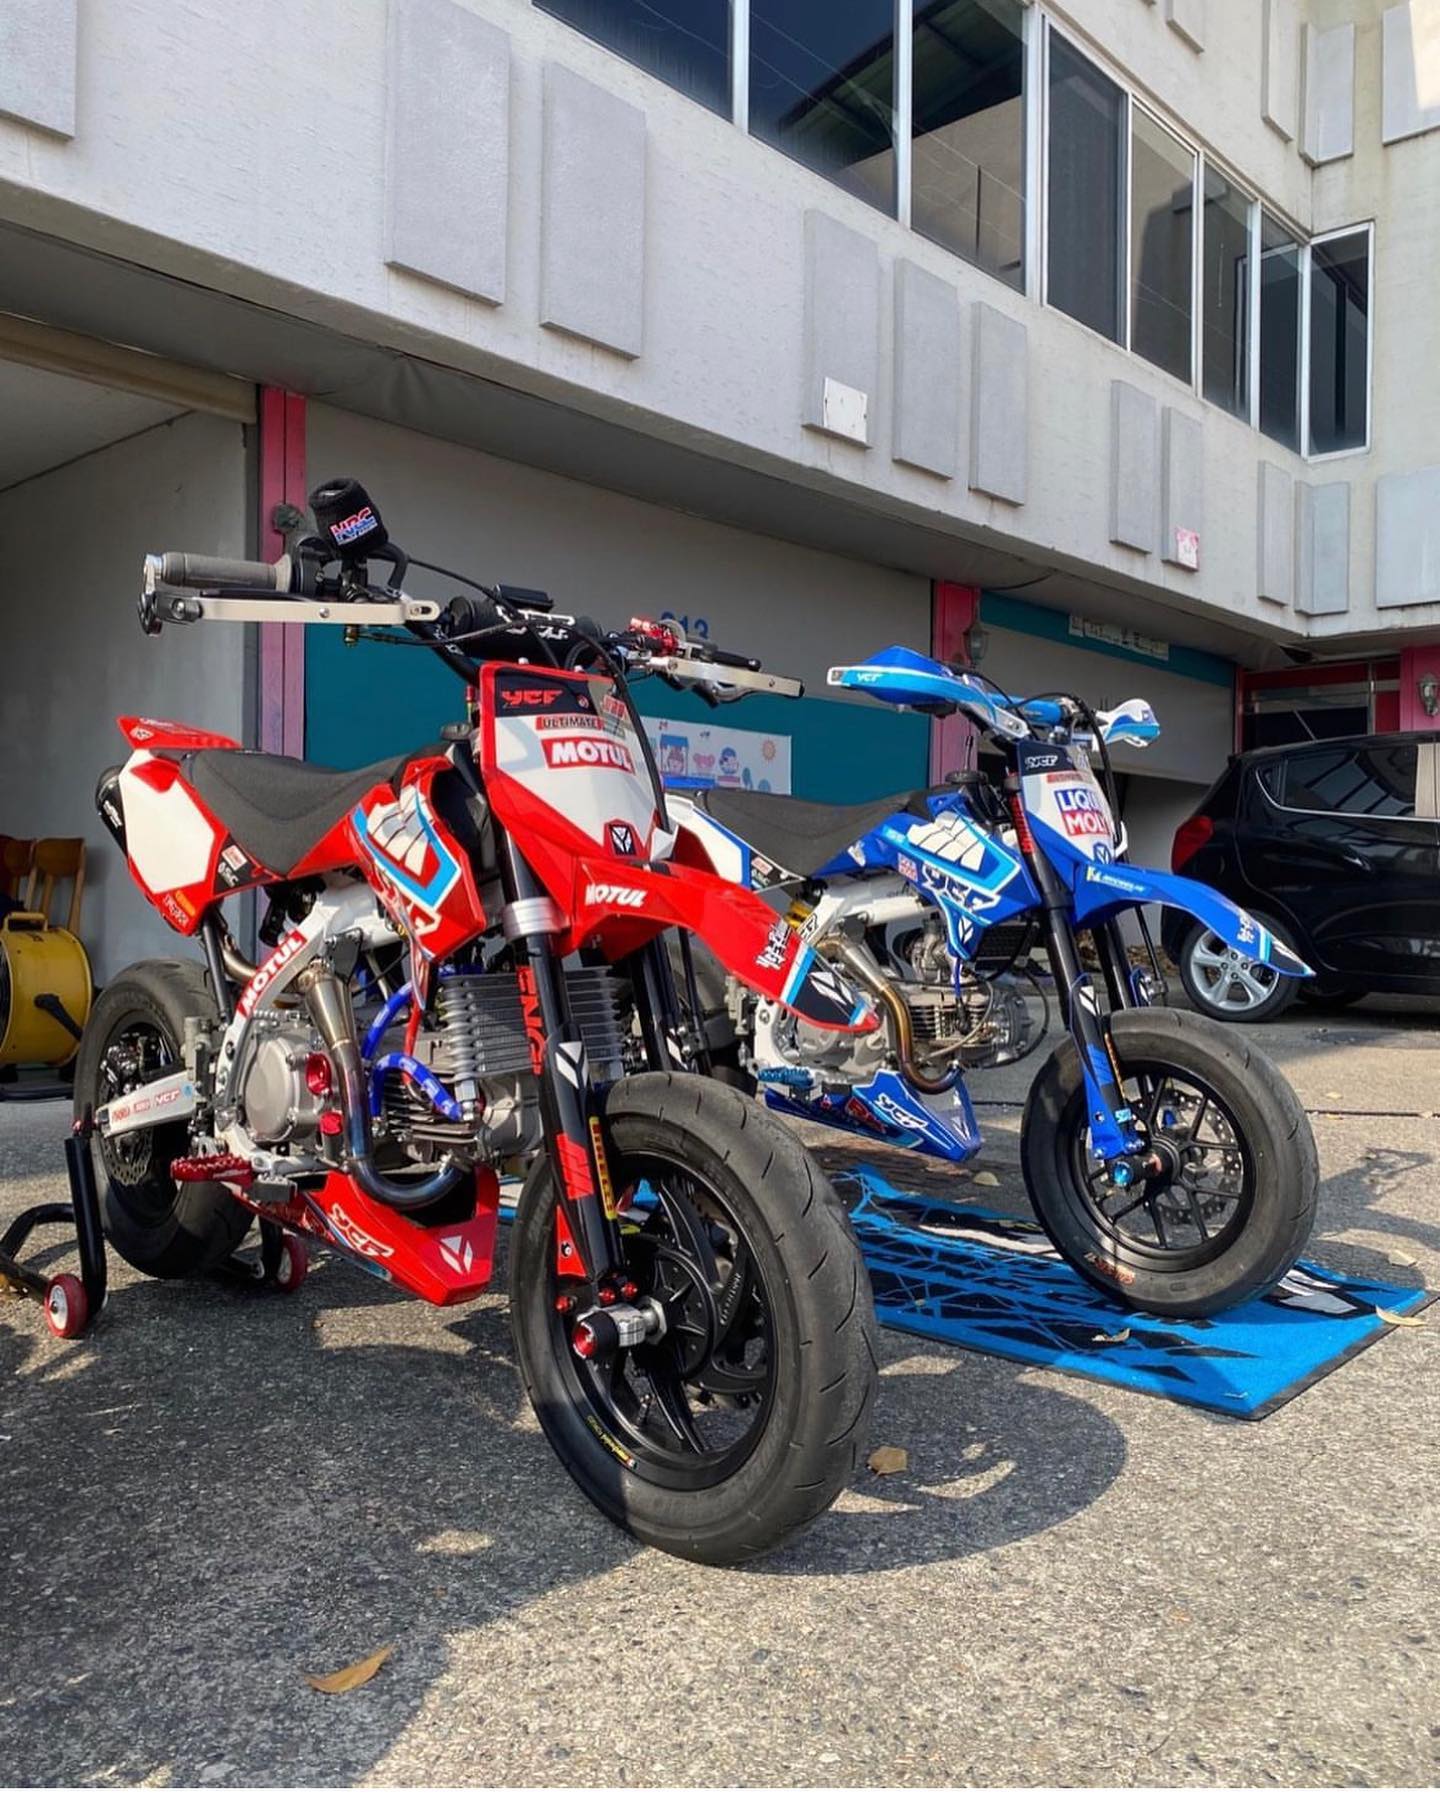 Difficult to make a choice ! ❤️💙
—
#ycf #supermoto #moto #motorcycle